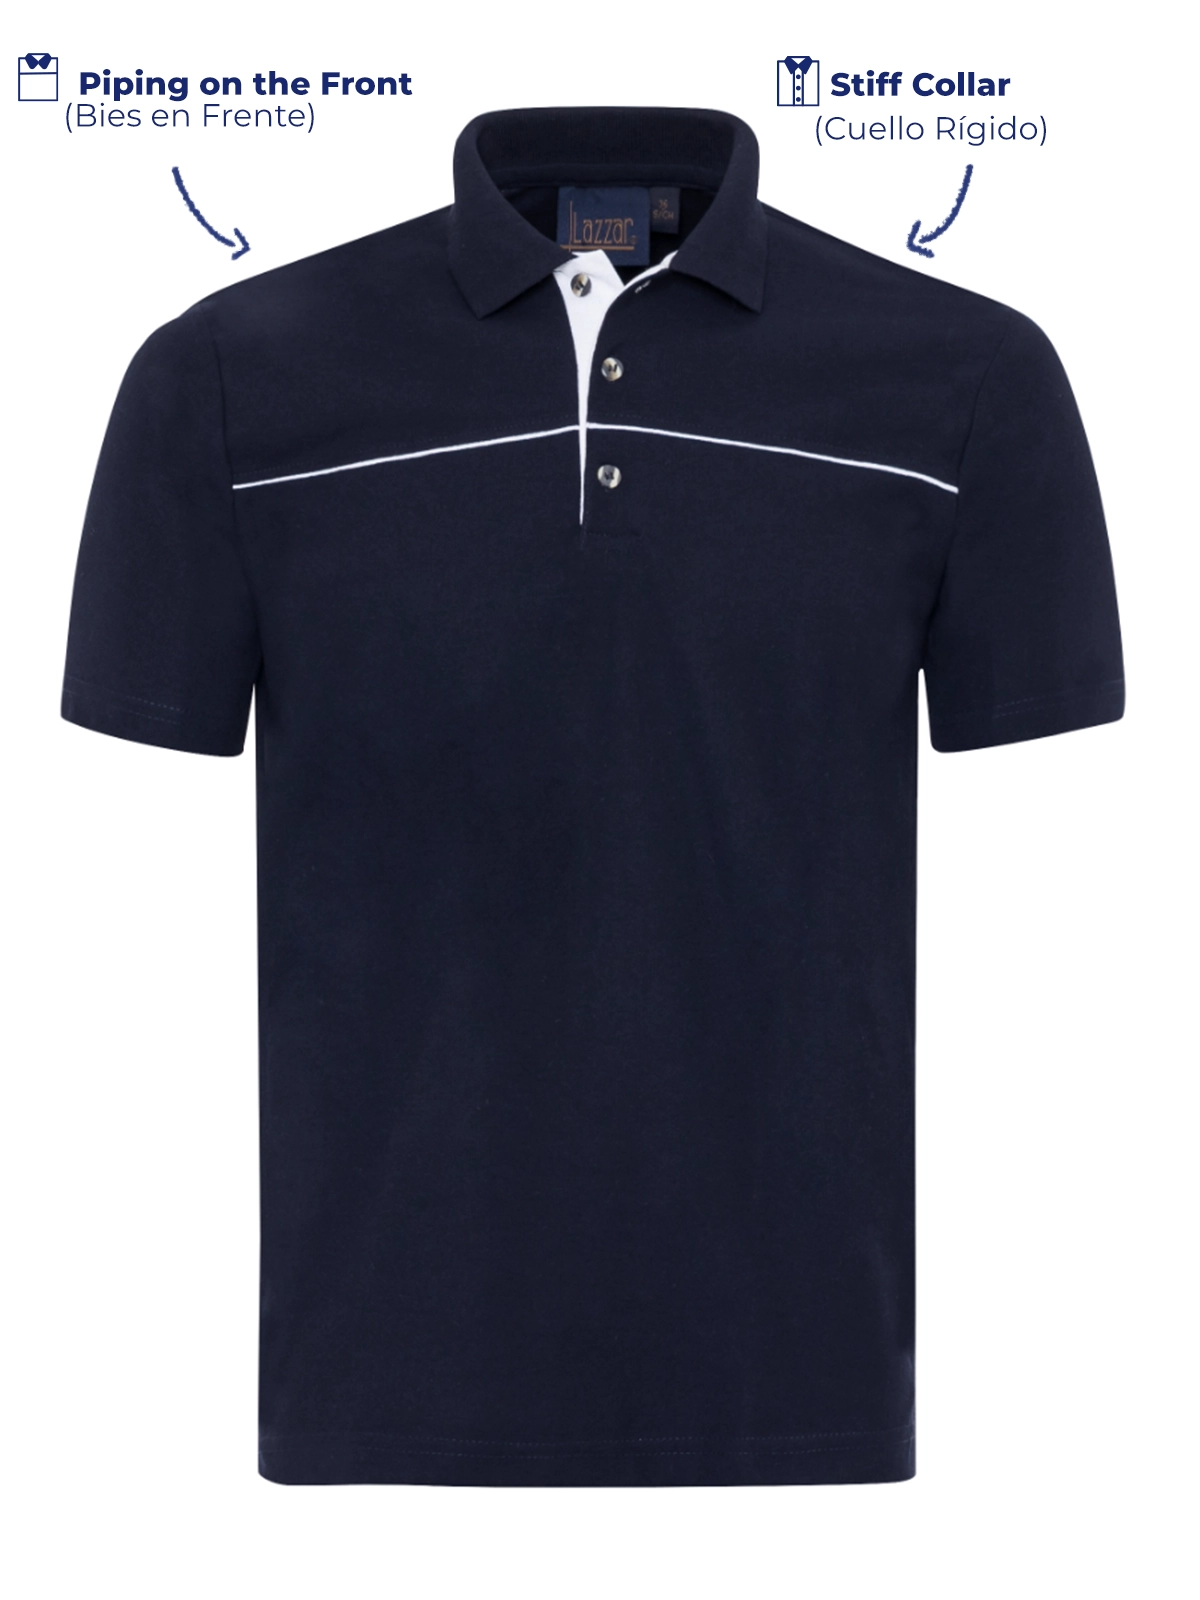 Polo shirt P 506 navy blue with white front view